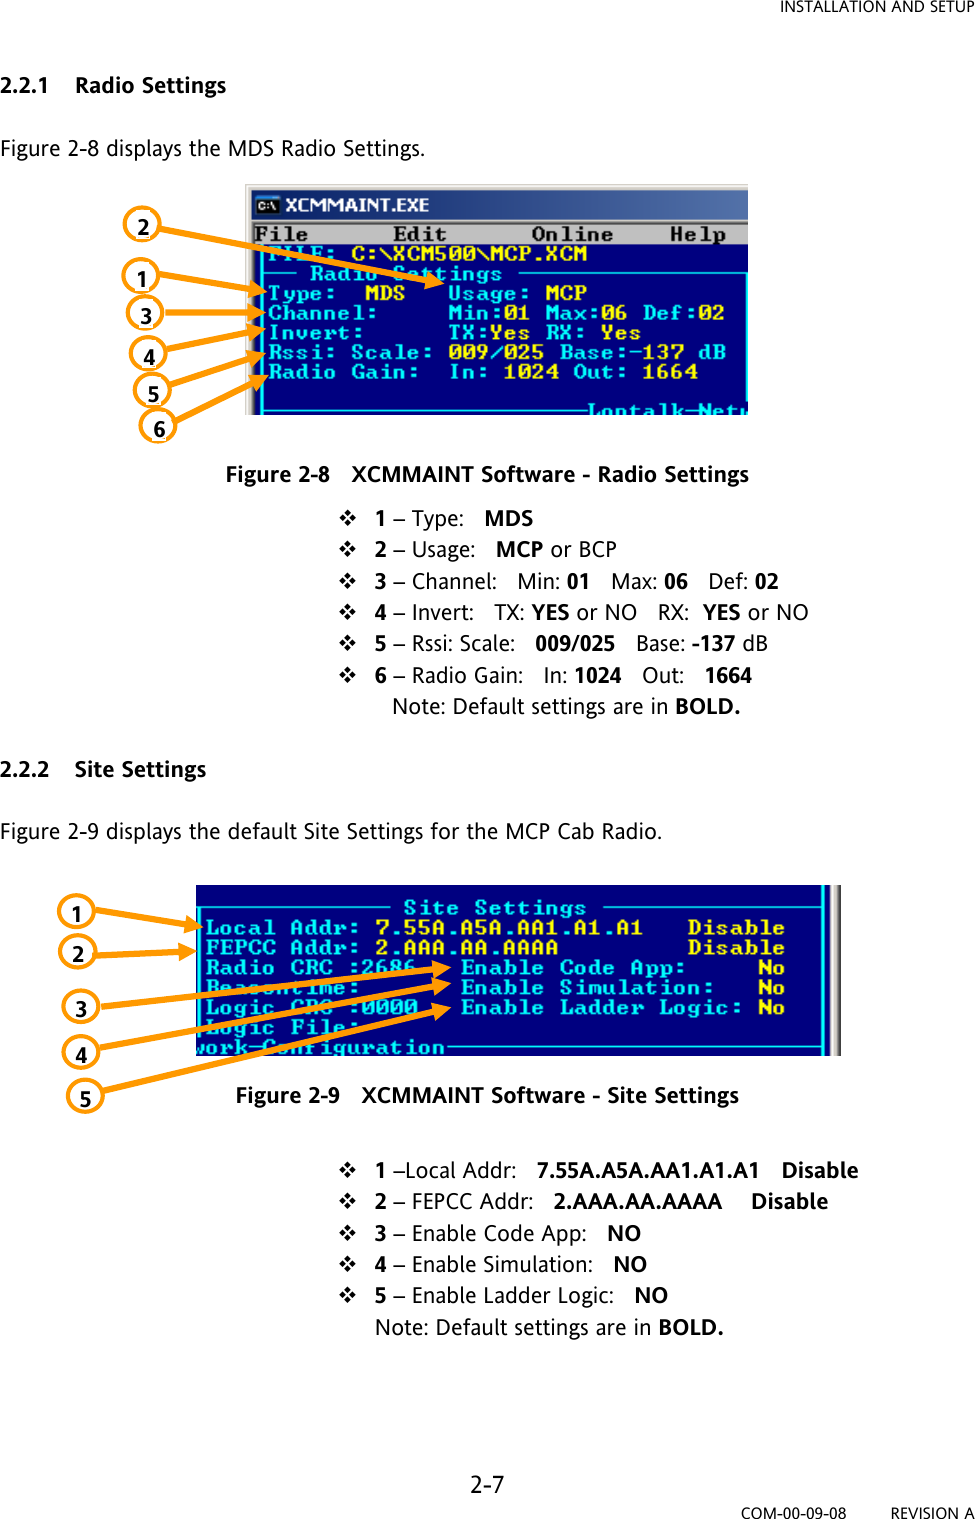 INSTALLATION AND SETUP 2-7 COM-00-09-08         REVISION A 2.2.1 Radio Settings  Figure 2-8 displays the MDS Radio Settings.          Figure 2-8   XCMMAINT Software - Radio Settings  1 – Type:   MDS  2 – Usage:   MCP or BCP  3 – Channel:   Min: 01   Max: 06   Def: 02    4 – Invert:   TX: YES or NO   RX:  YES or NO    5 – Rssi: Scale:   009/025   Base: -137 dB  6 – Radio Gain:   In: 1024   Out:   1664                                                           Note: Default settings are in BOLD.  2.2.2 Site Settings  Figure 2-9 displays the default Site Settings for the MCP Cab Radio.        Figure 2-9   XCMMAINT Software - Site Settings   1 –Local Addr:   7.55A.A5A.AA1.A1.A1   Disable  2 – FEPCC Addr:   2.AAA.AA.AAAA    Disable  3 – Enable Code App:   NO   4 – Enable Simulation:   NO  5 – Enable Ladder Logic:   NO Note: Default settings are in BOLD.    1234561 2 3 4 5 